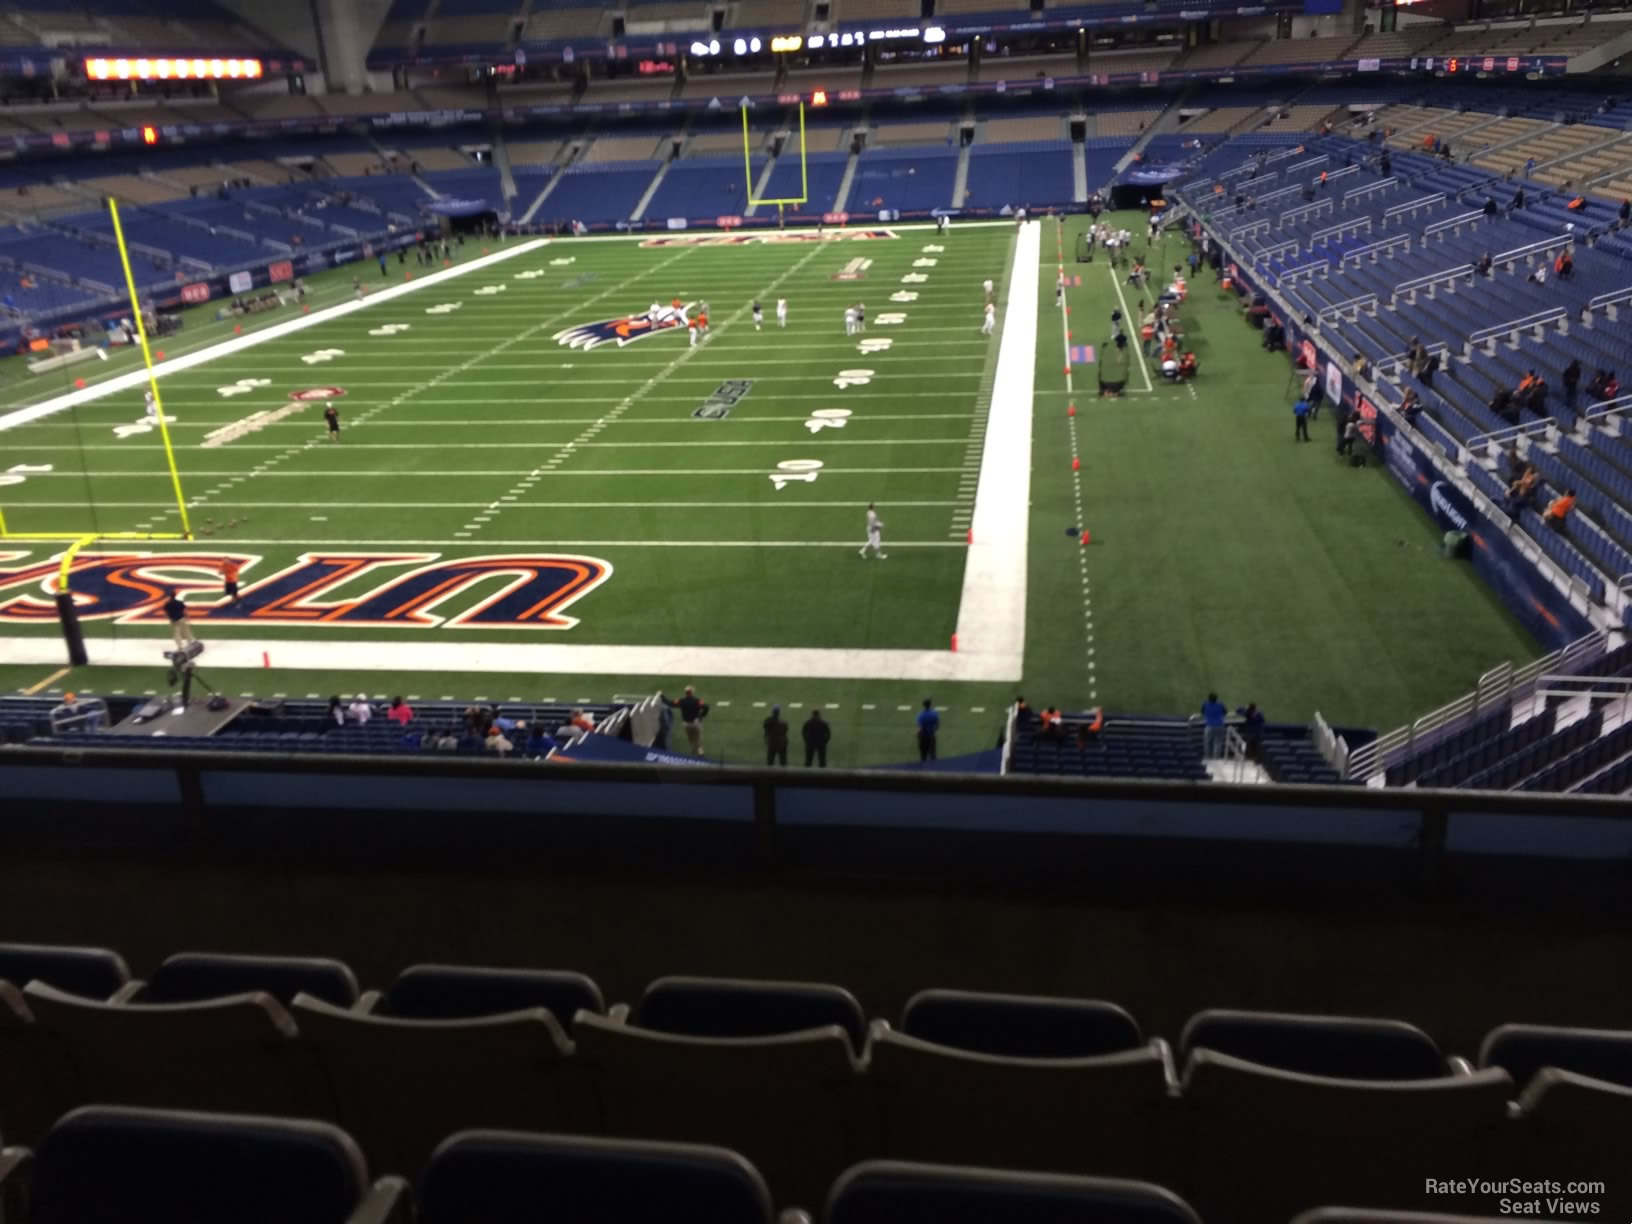 section 221, row 5 seat view  for football - alamodome